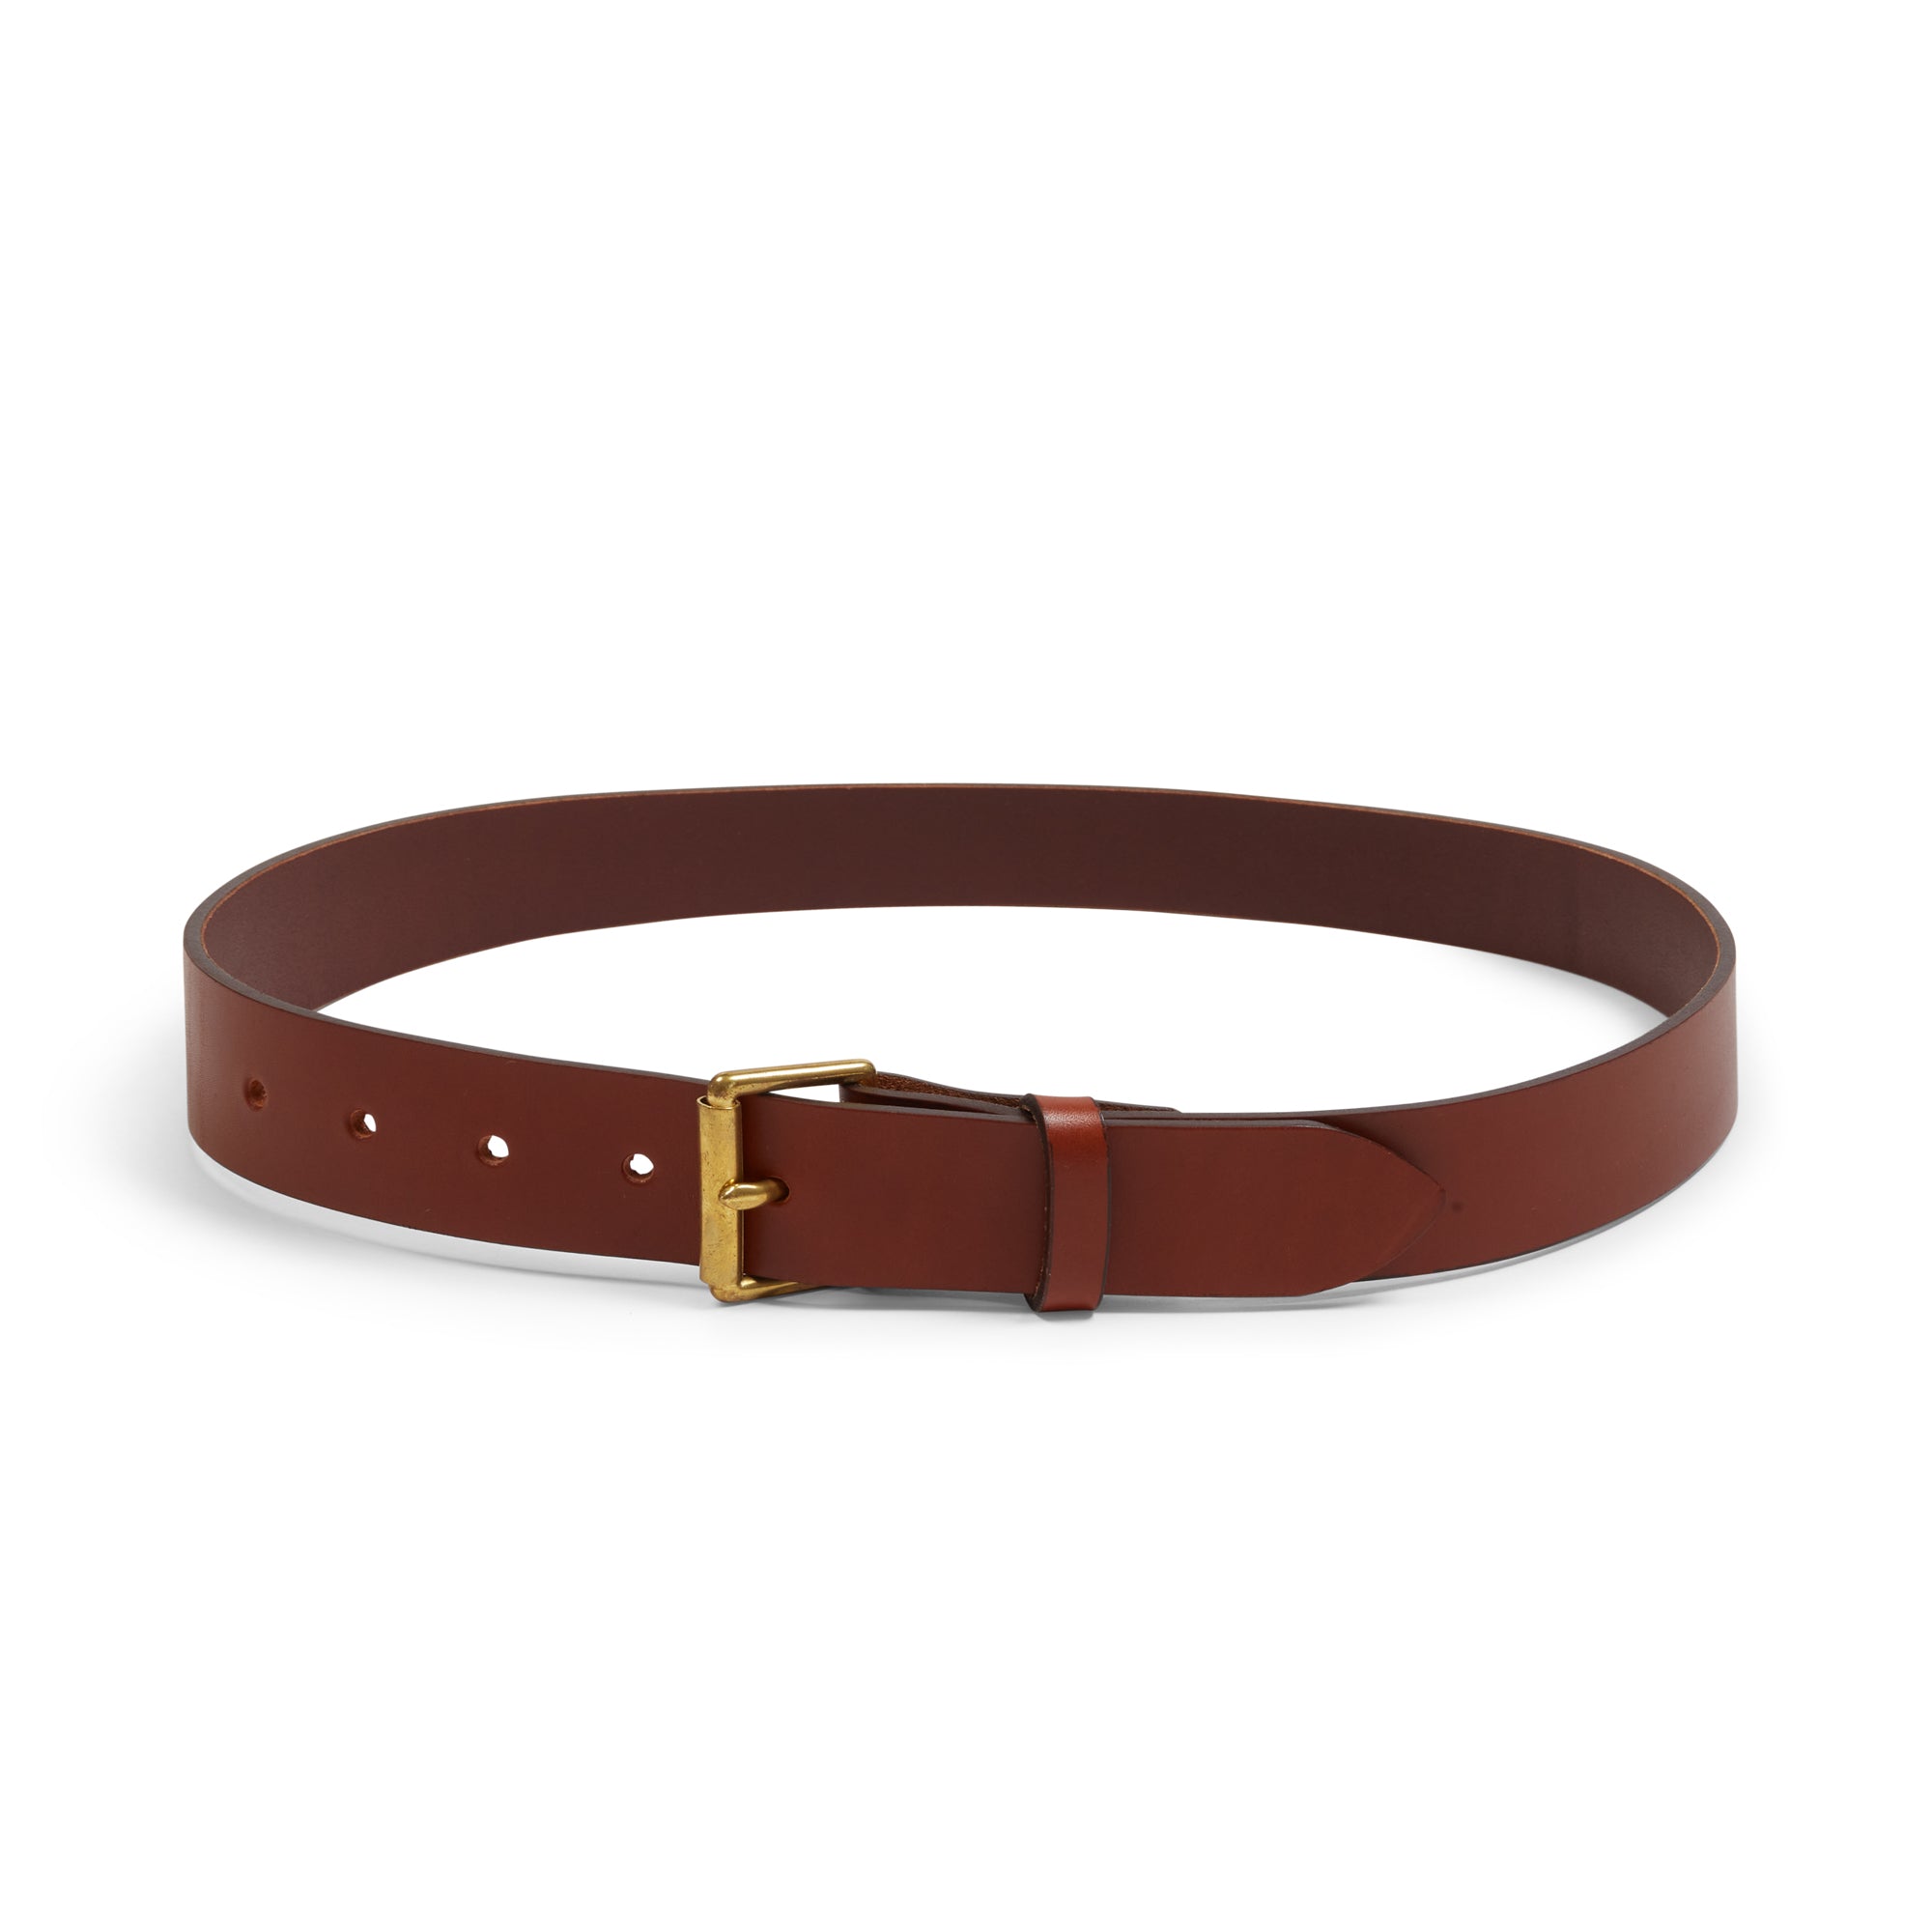 burrows-and-hare-bridle-leather-belt-tan